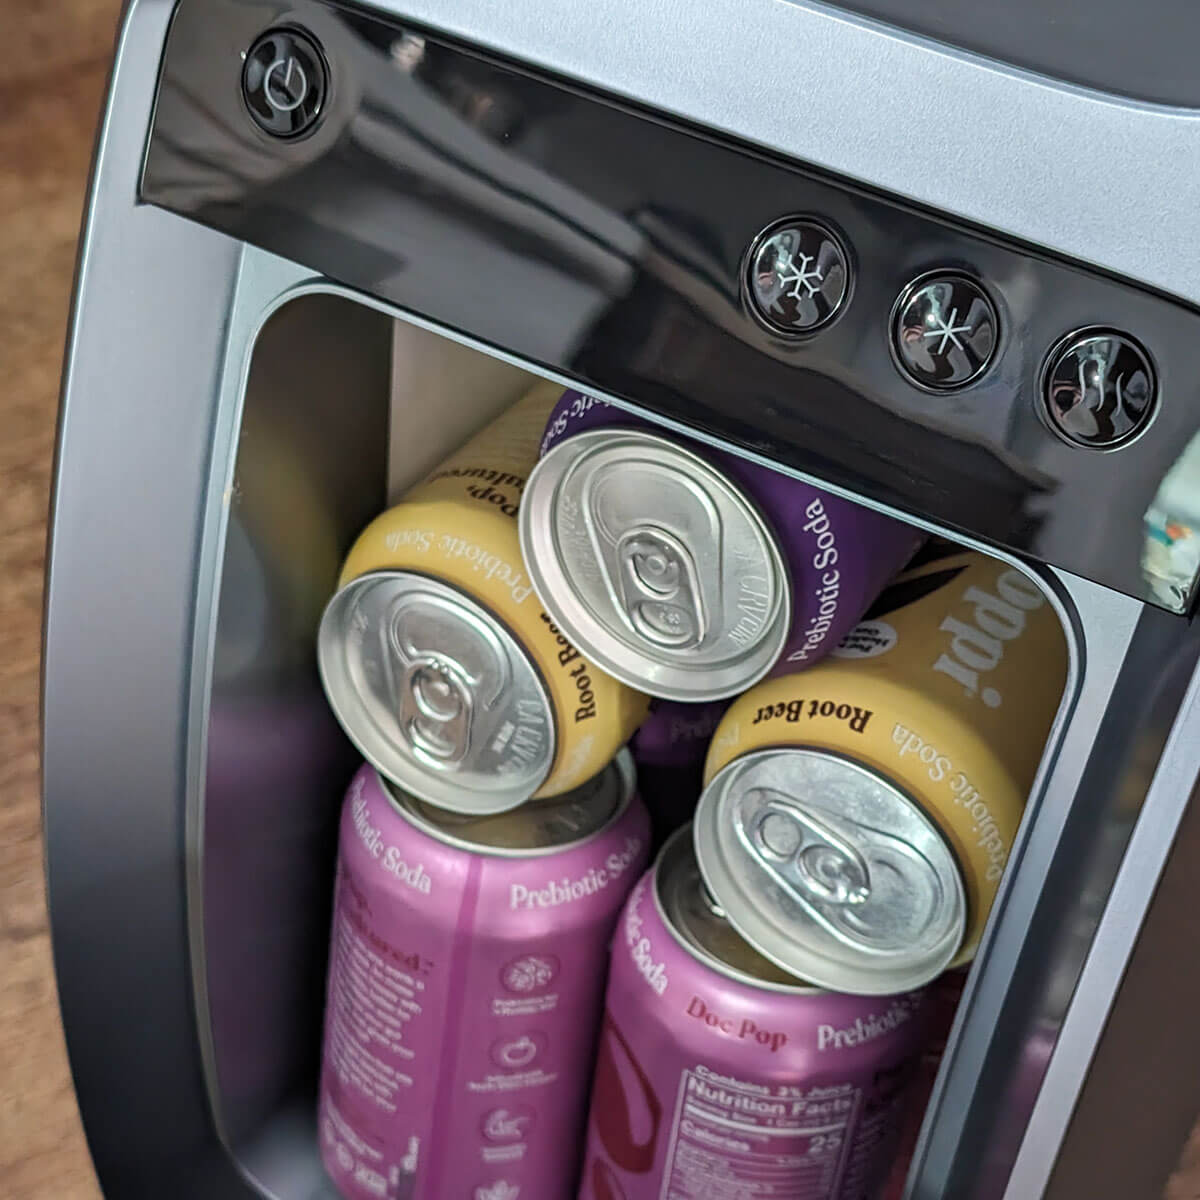 Tesla Refrigerator by TESCAMP Review